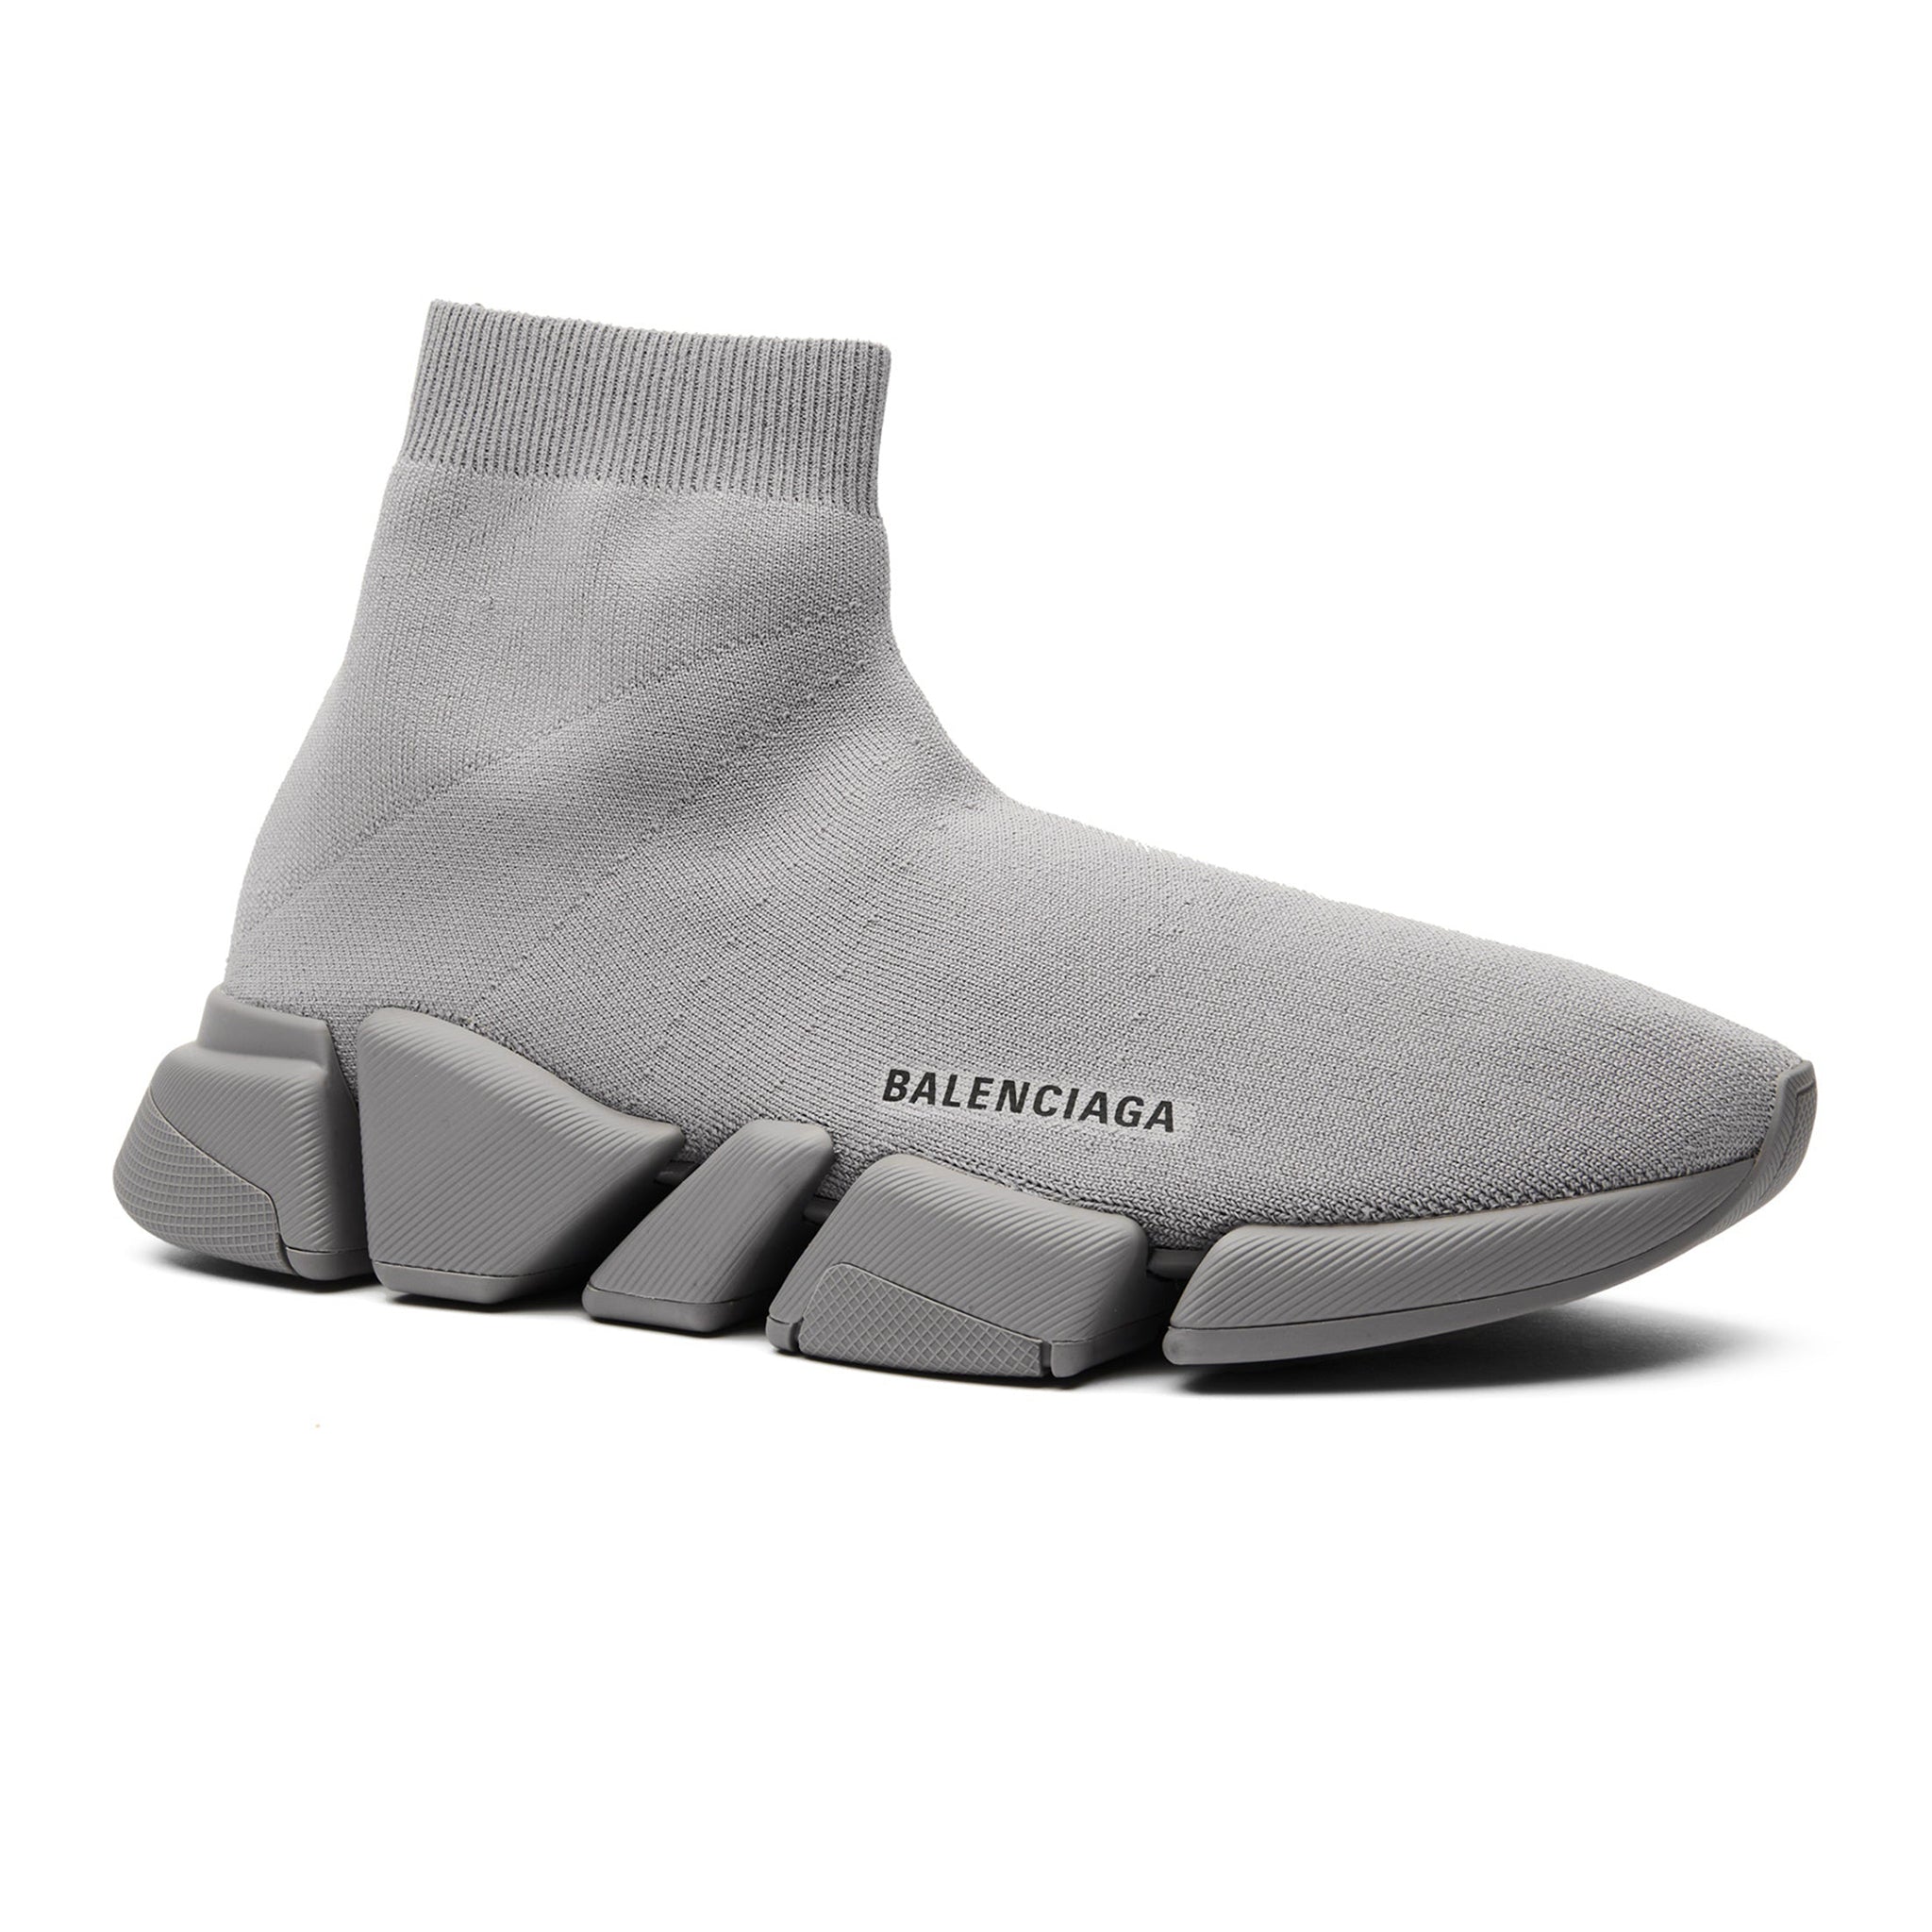 How Balenciagas 700 sock with a sole became the hottest sneaker in fashion